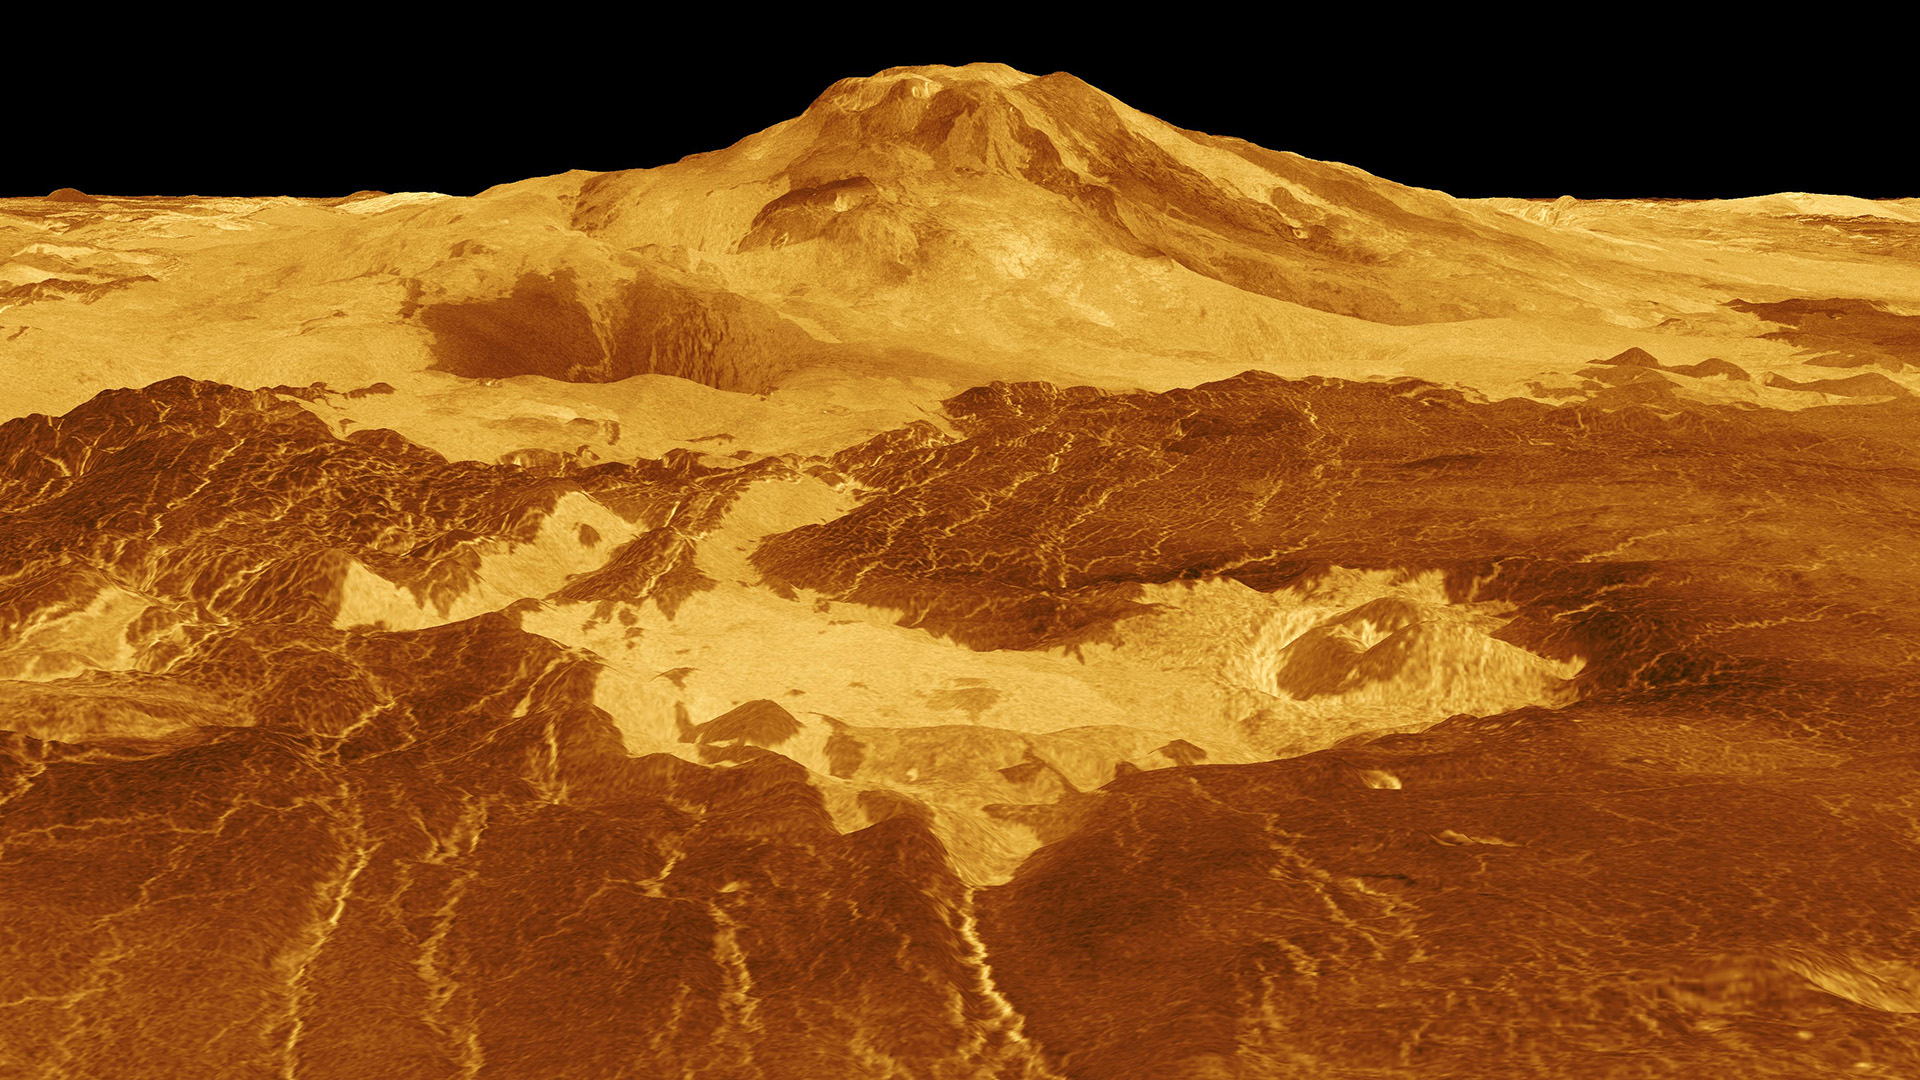 Oceans may have covered Venus before it became a hell planet, study claims